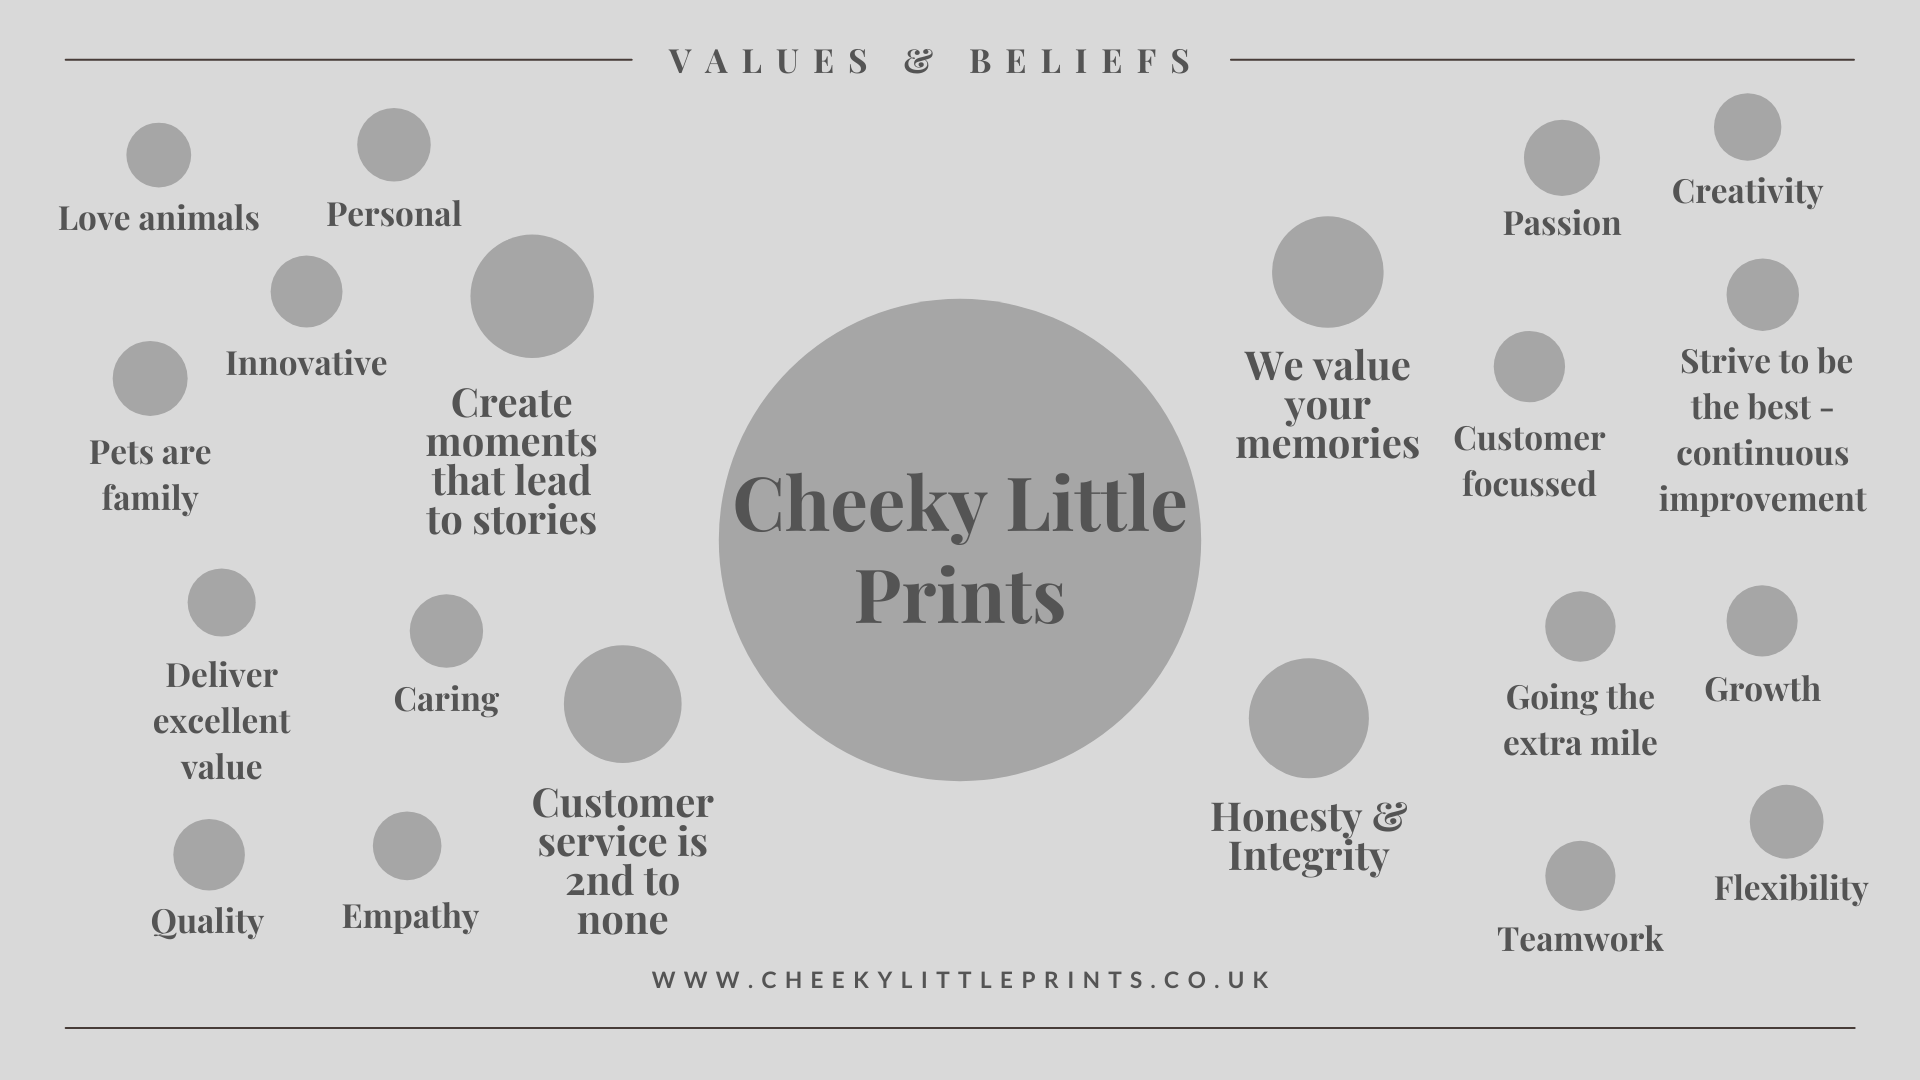 Cheeky Little Prints values and beliefs infographic